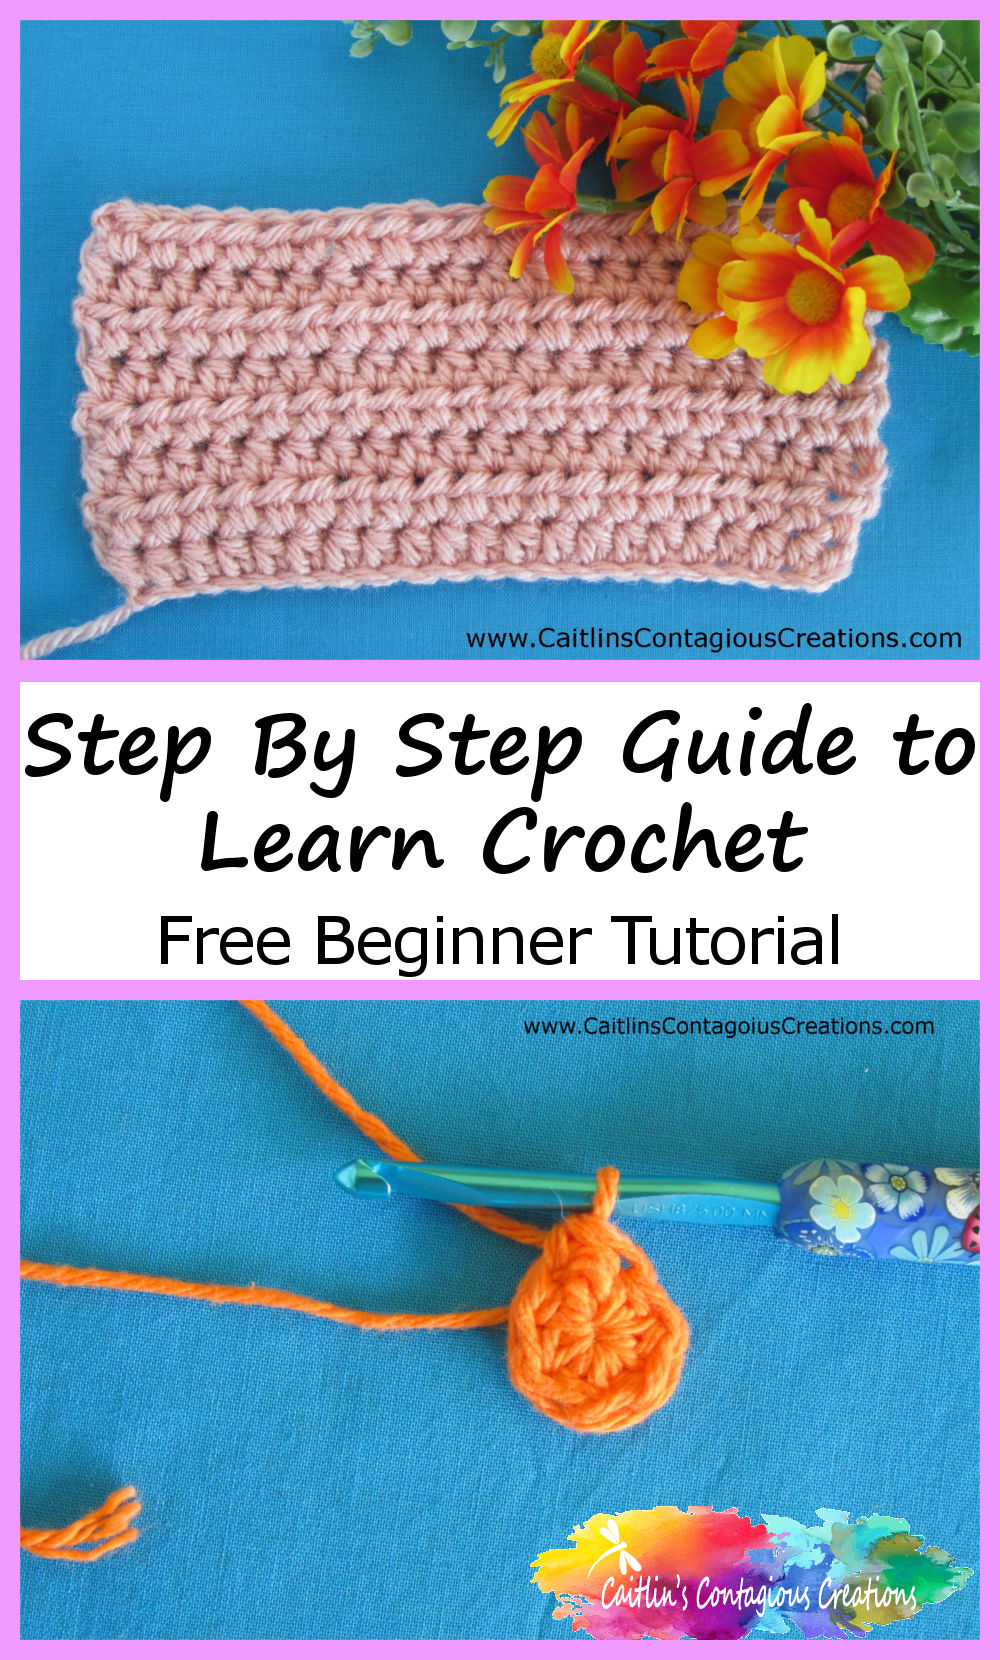 clickable images of completed crochet stitches and techniques with text overlay